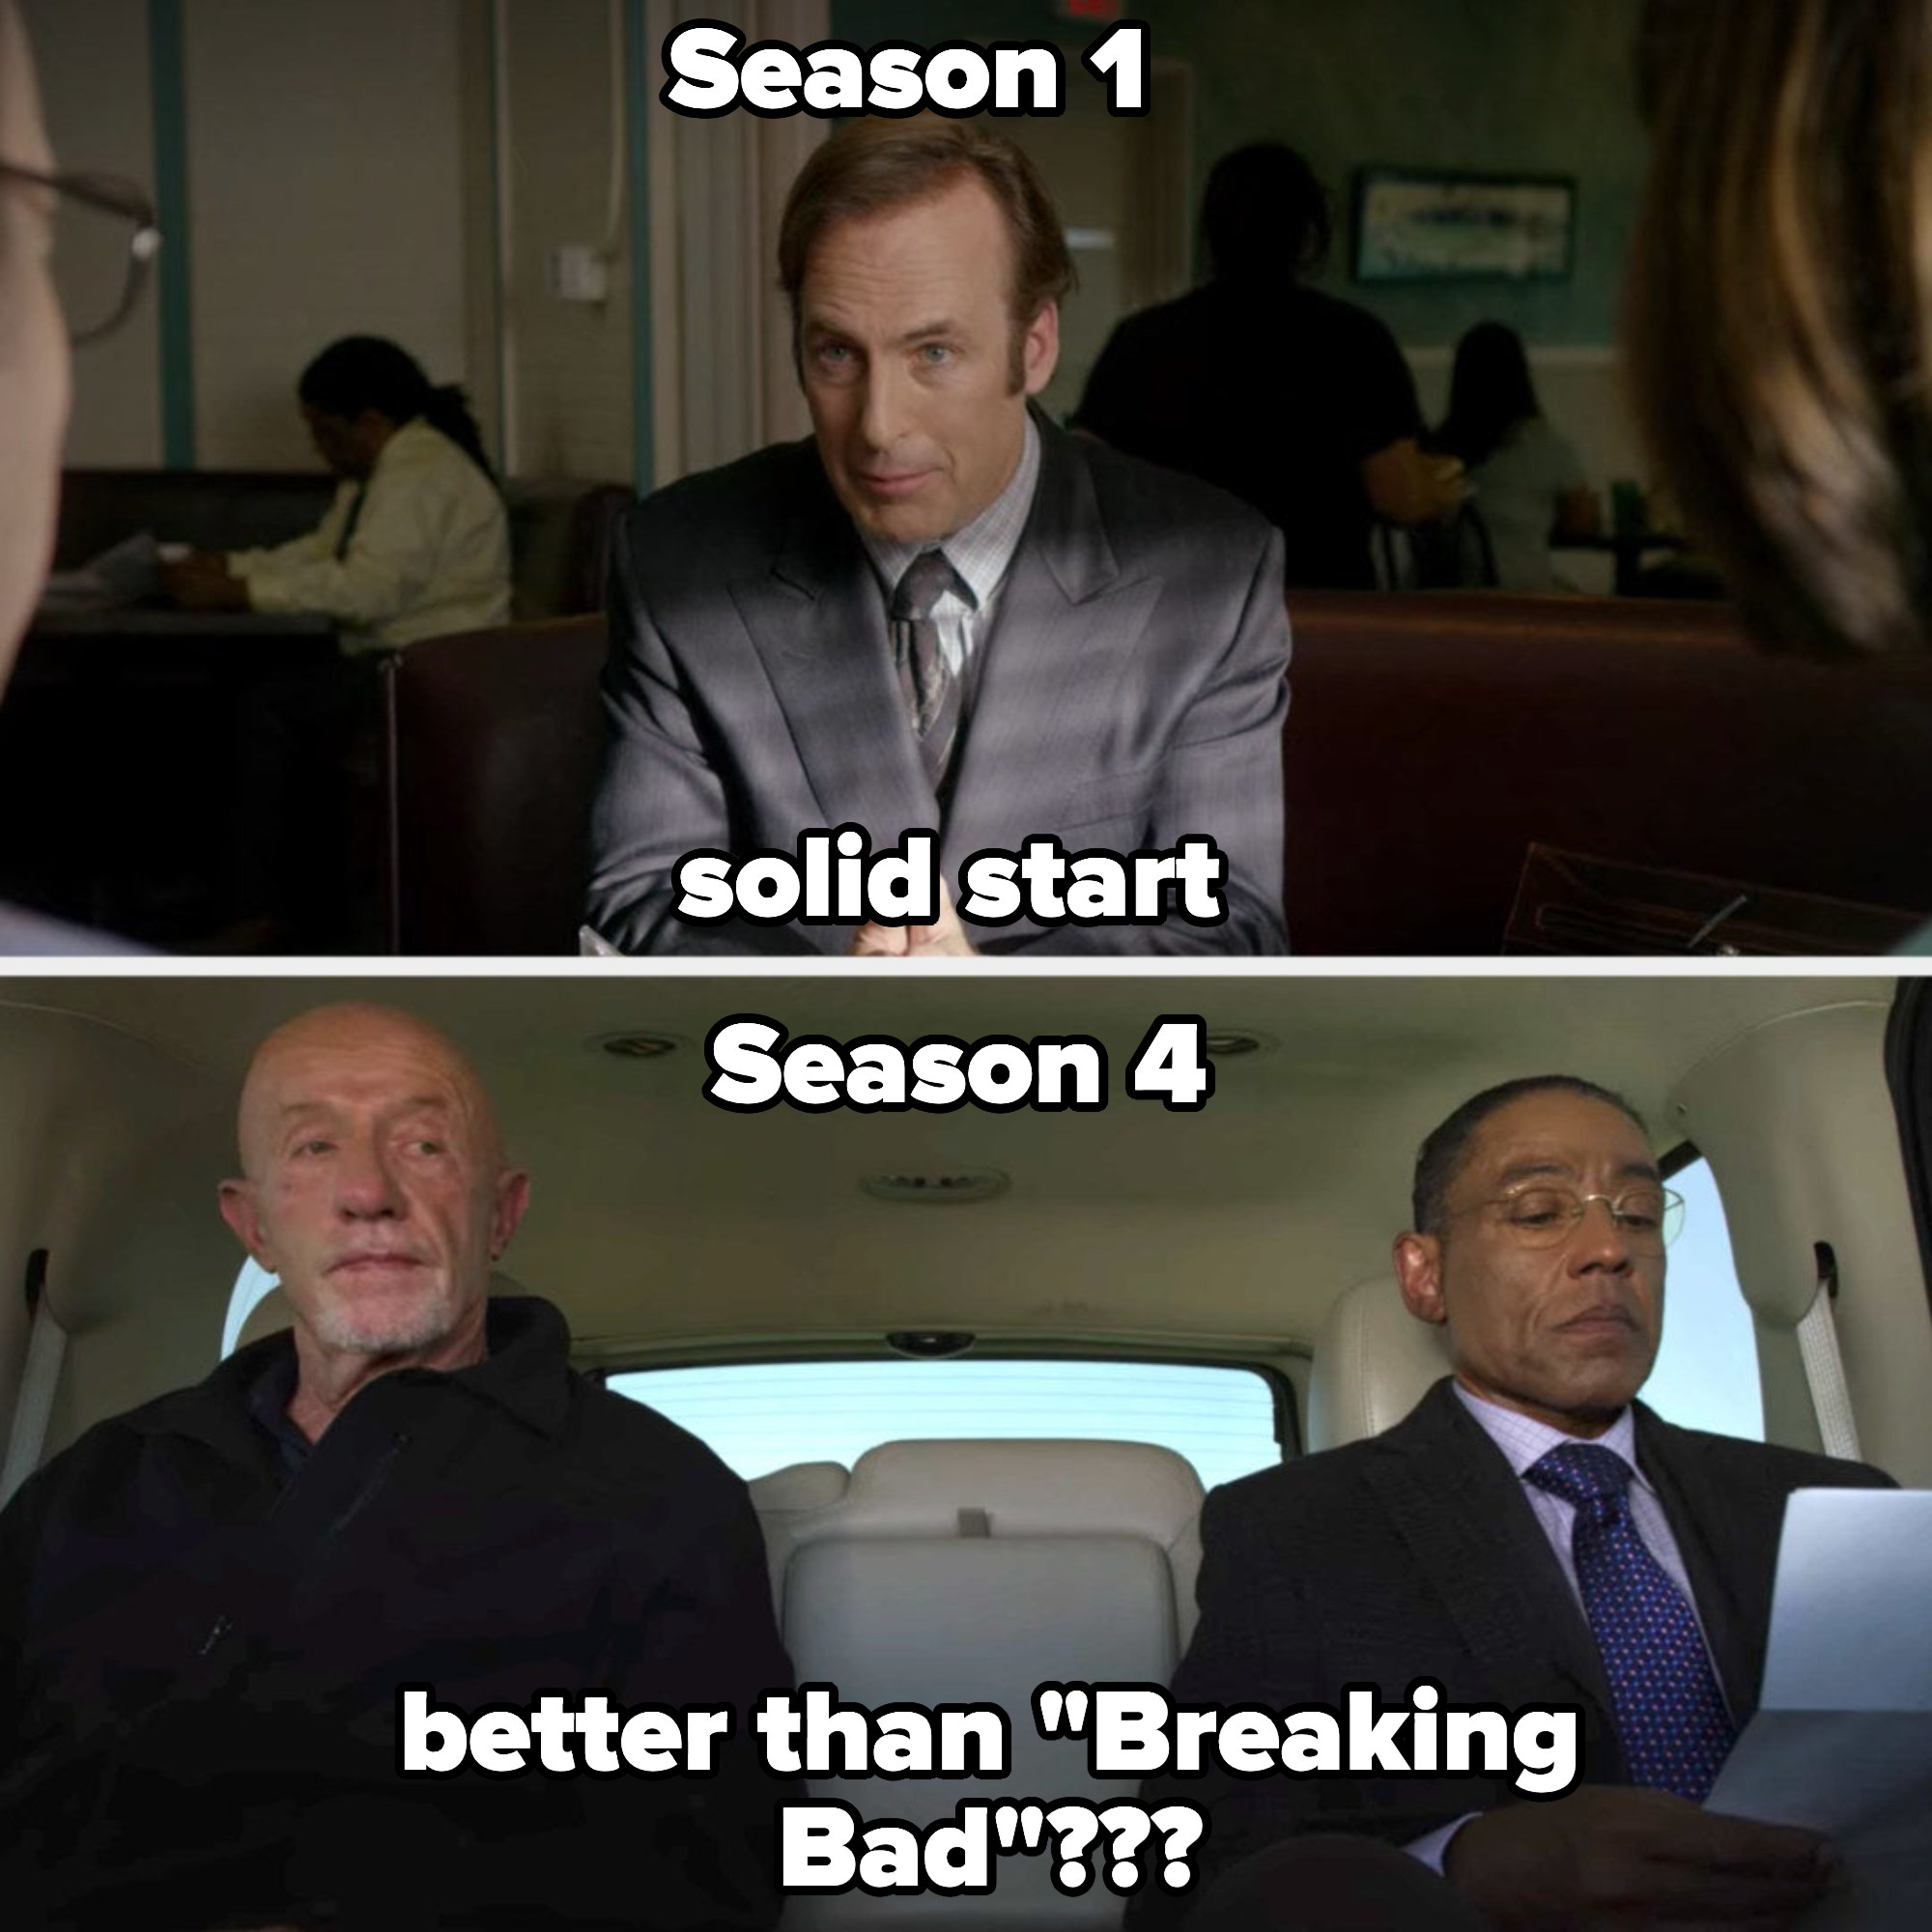 saul in season 1 labeled &quot;solid start&quot; and Mike and Gus in Season 4 labeled &quot;better than Breaking Bad???&quot;